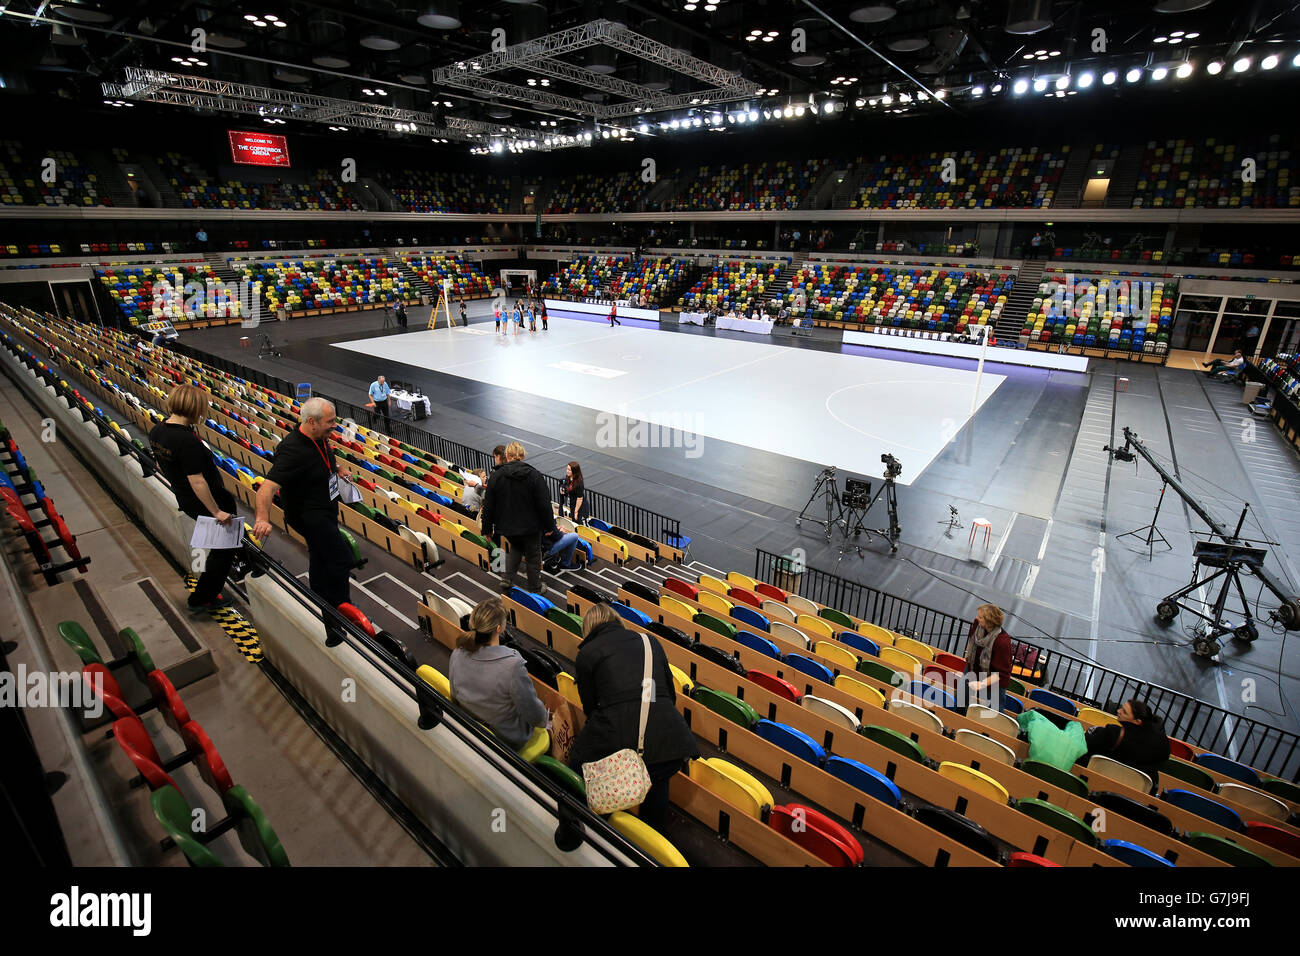 Netball - International Netball Series - England v Malawi - Copper Box Arena. A general view of the Copper Box Arena Stock Photo